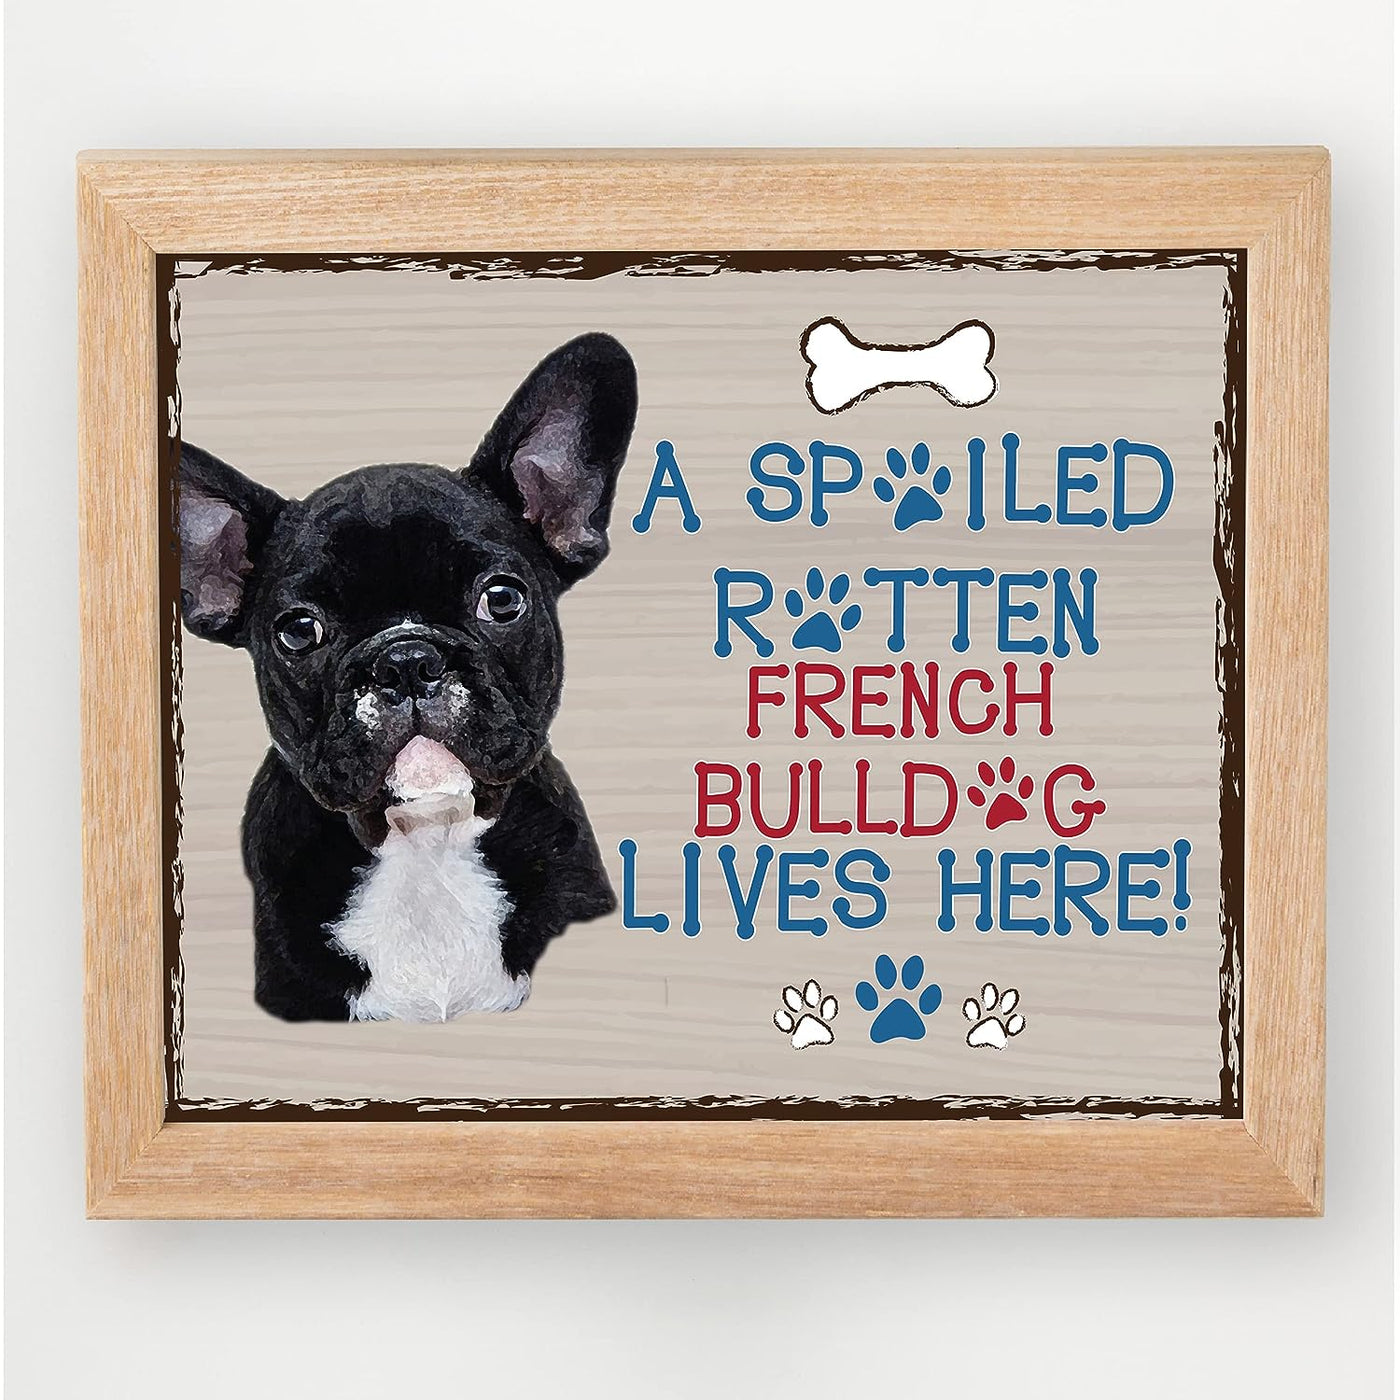 French Bulldog-Dog Poster Print-10 x 8" Wall Decor Sign-Ready To Frame."A Spoiled Rotten French Bulldog Lives Here". Perfect Pet Wall Art for Home-Kitchen-Cave-Garage. Great Gift for Frenchie Fans!